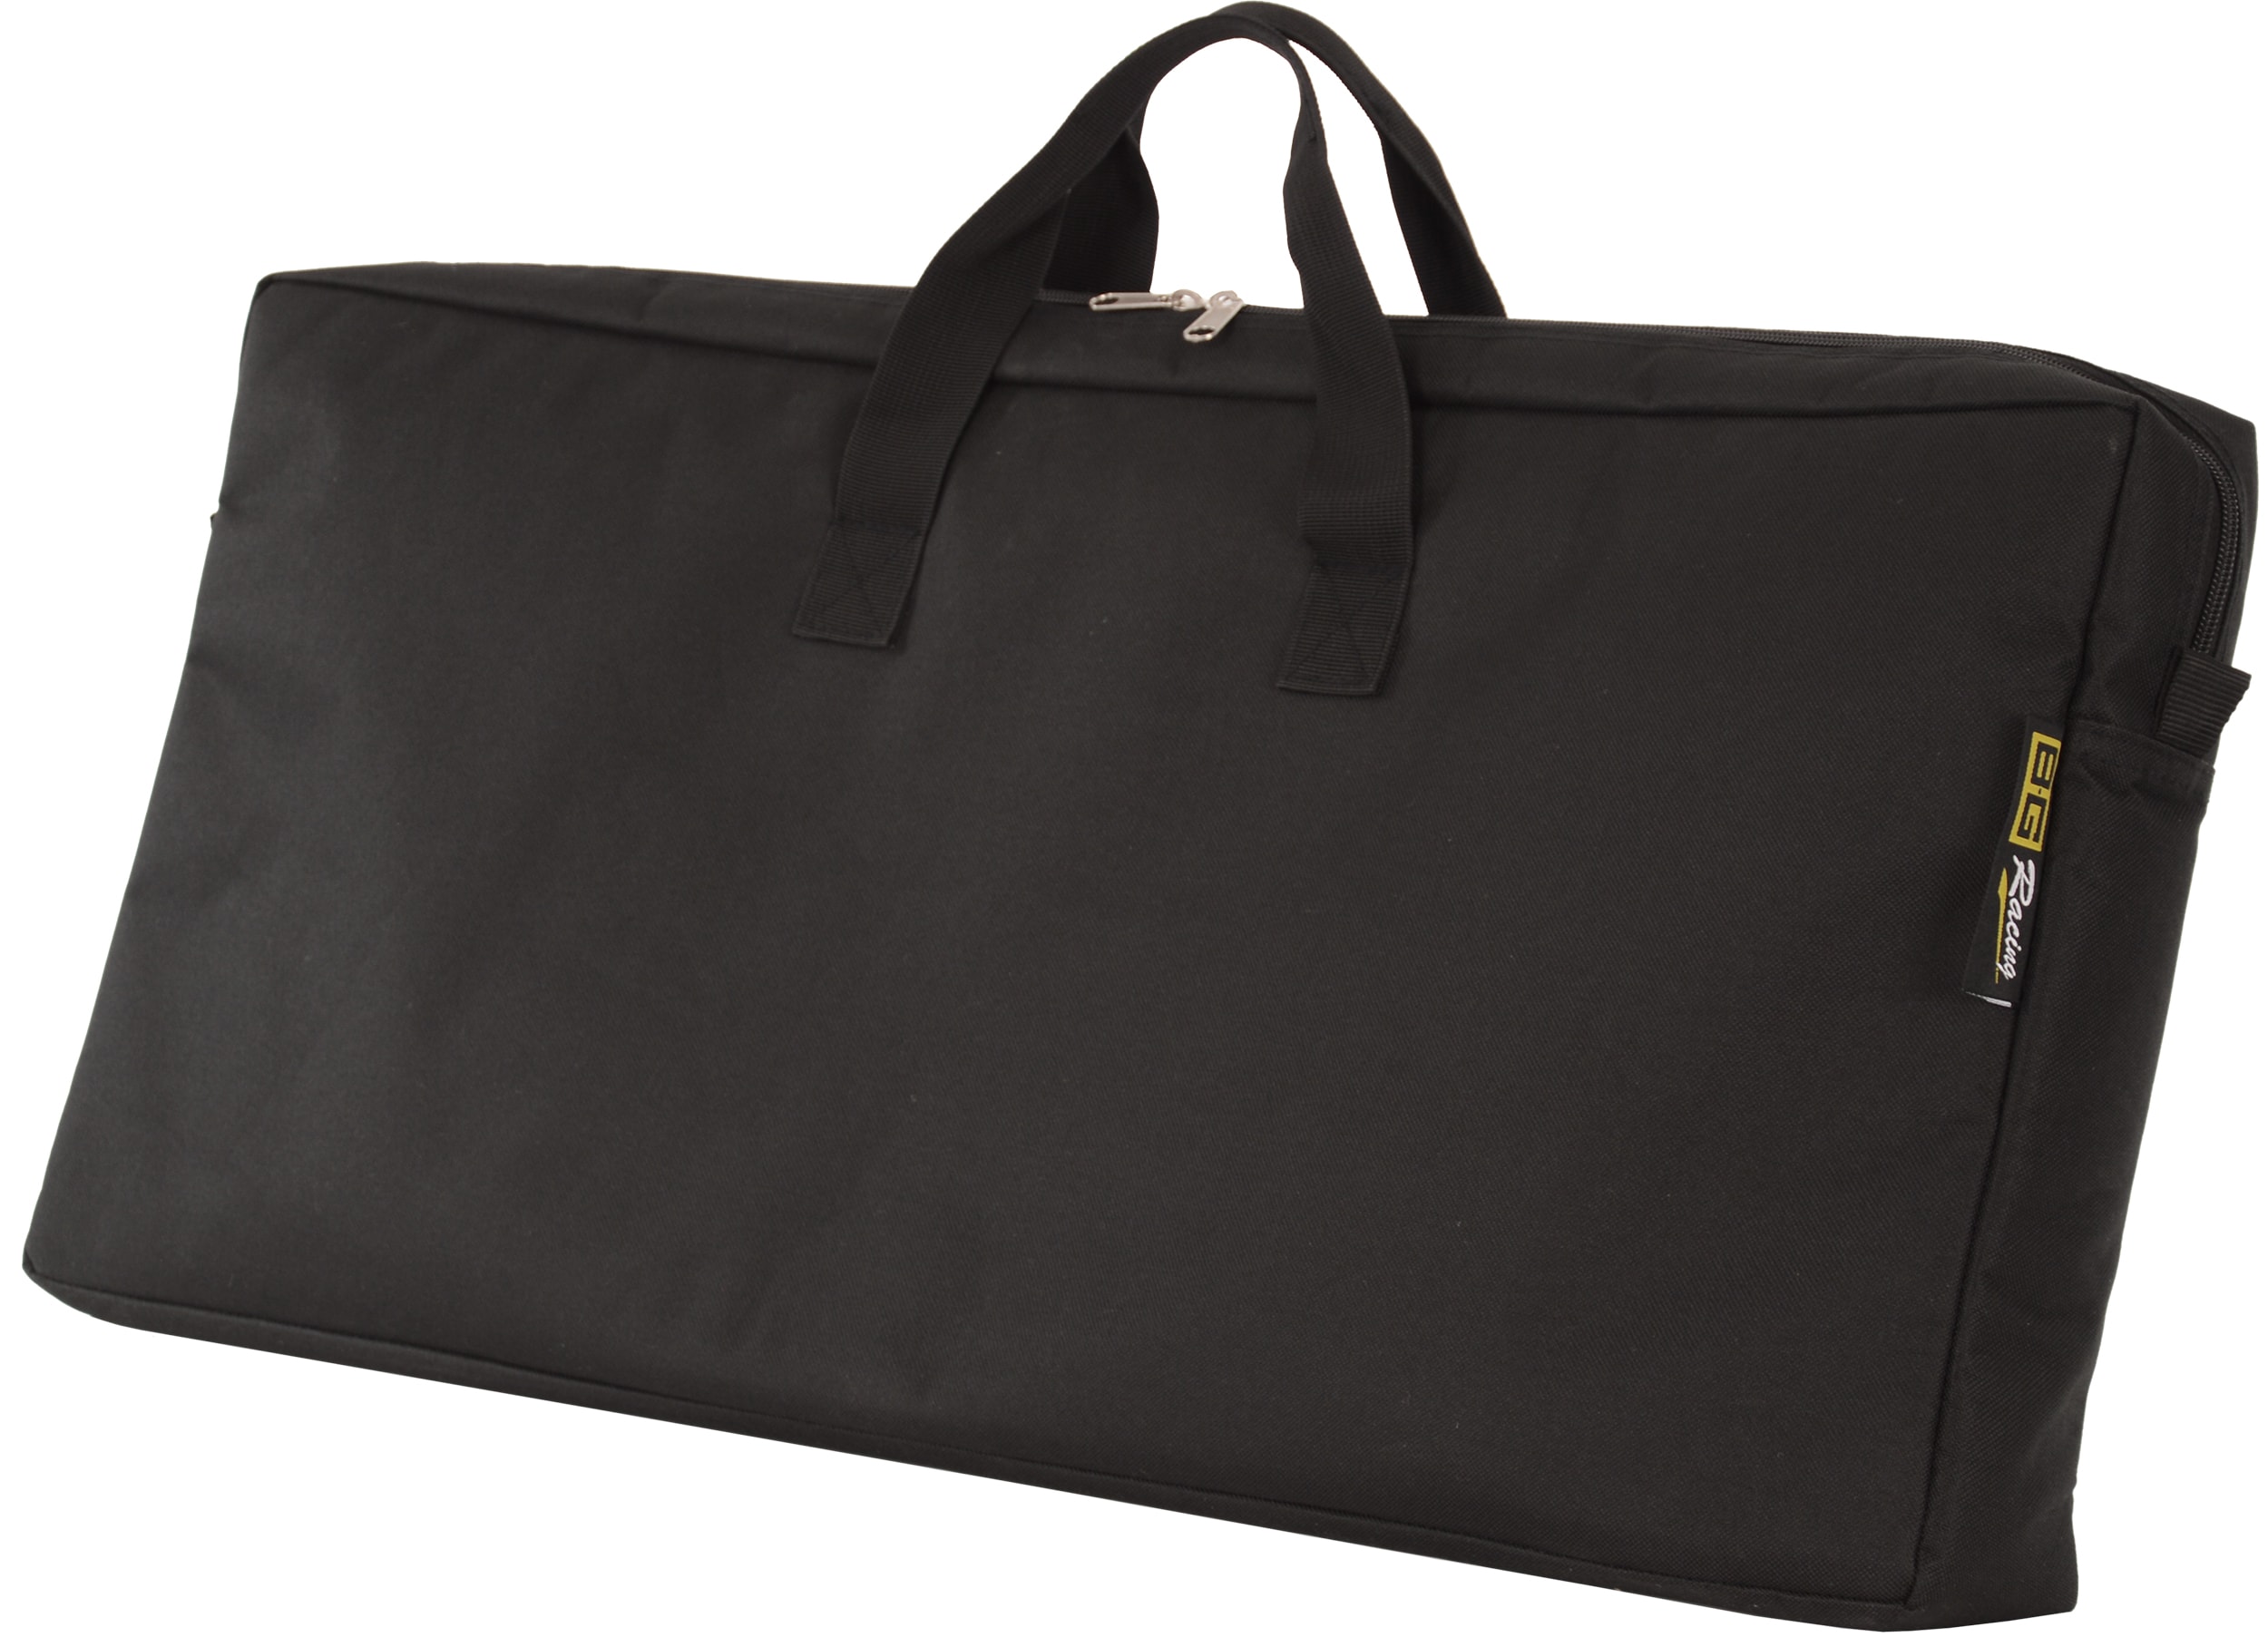 Carrying bag for B-G camber / caster frame system